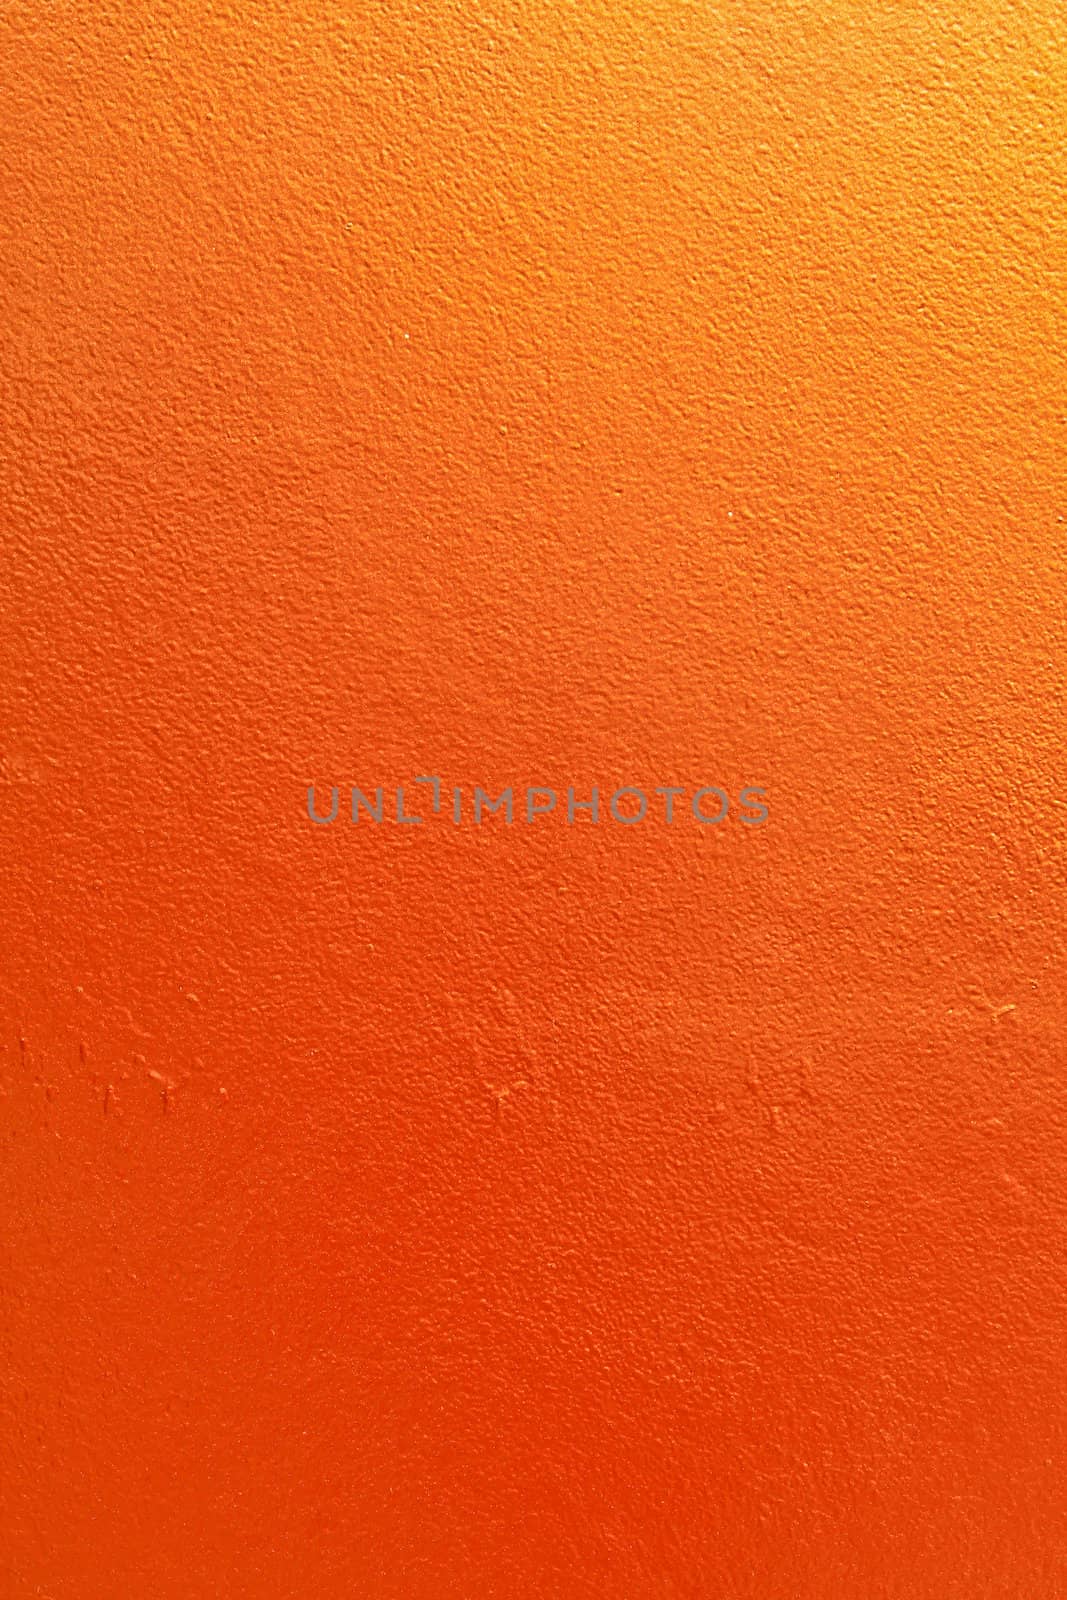 Orange wall. by Photoguide